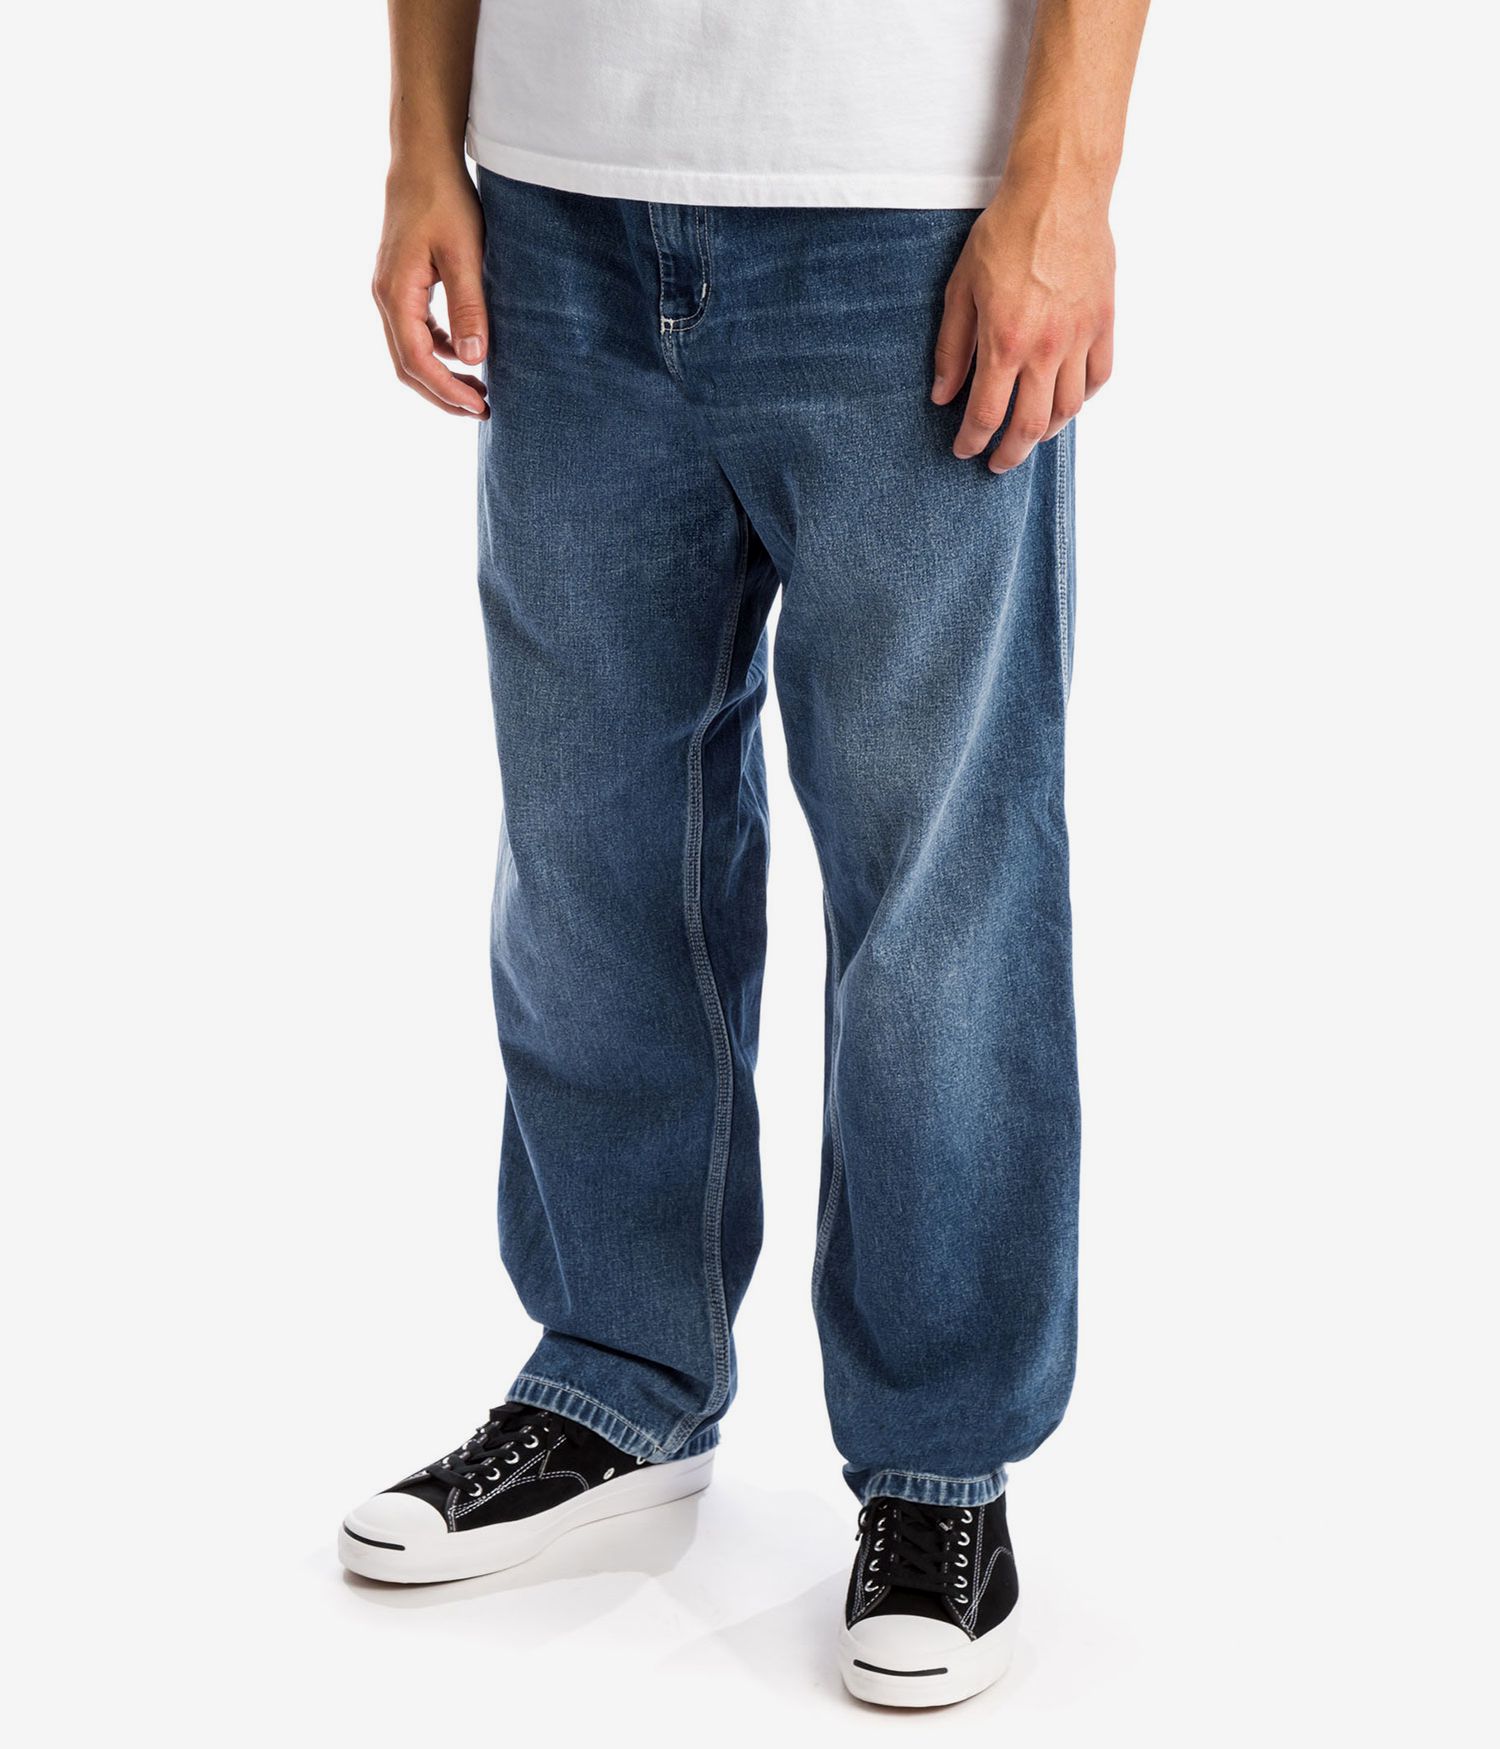 Carhartt WIP Simple Pant Norco Jeans (blue mid worn wash) buy at ...